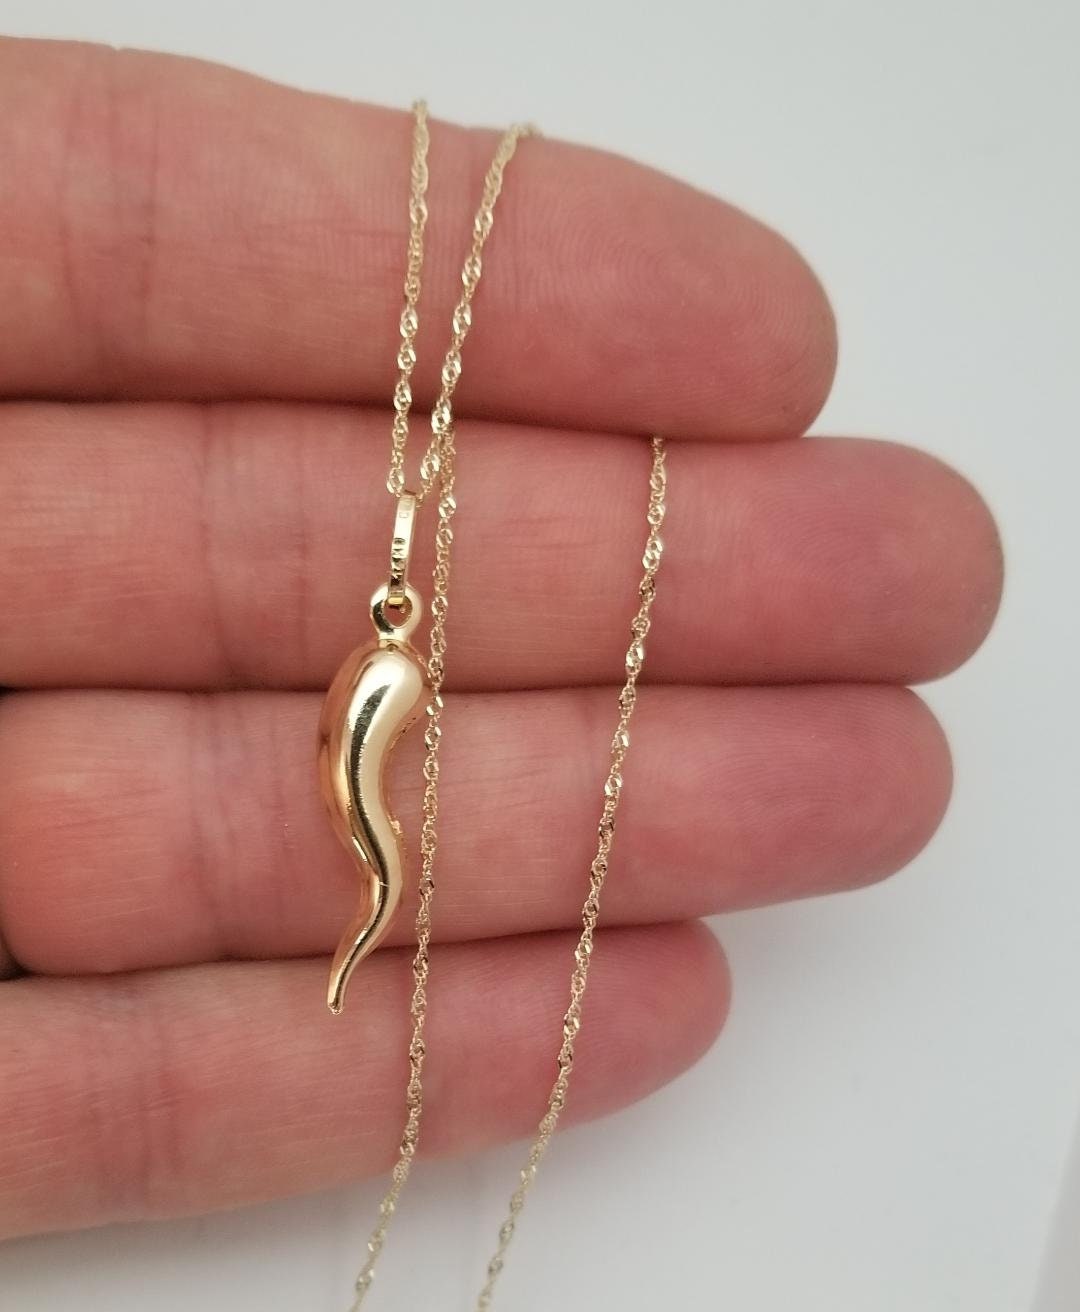 Cornicello Italian Horn Pendant Necklace 14K Solid Gold Good Luck Charm  Necklace | eBay